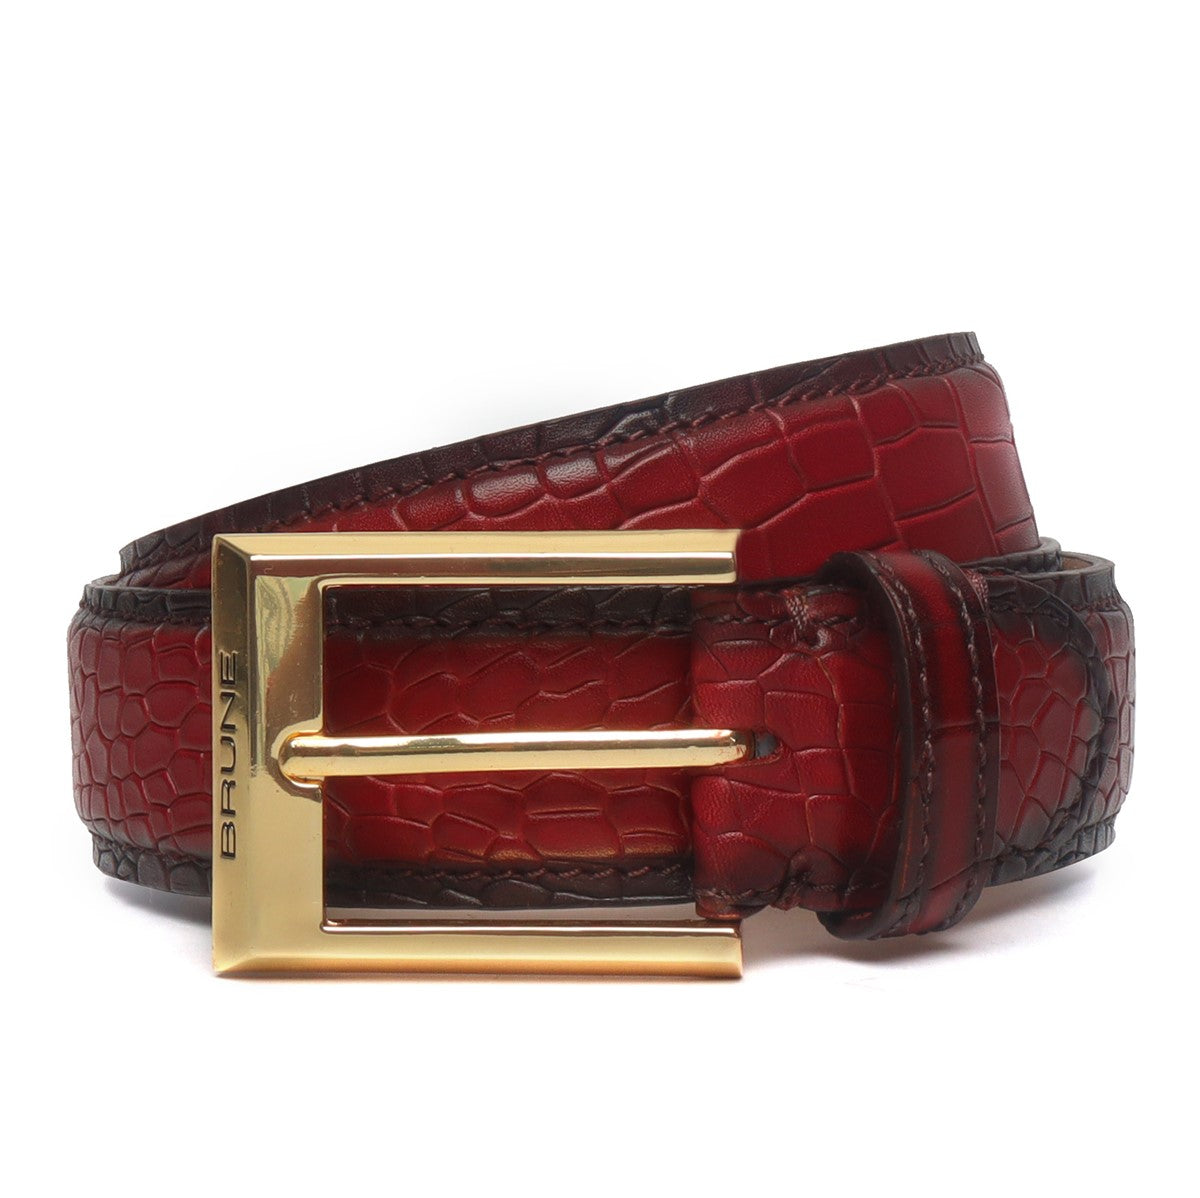 Wine Deep Cut Croco With Golden Square Buckle Hand Painted Leather Formal Belt By Brune & Bareskin